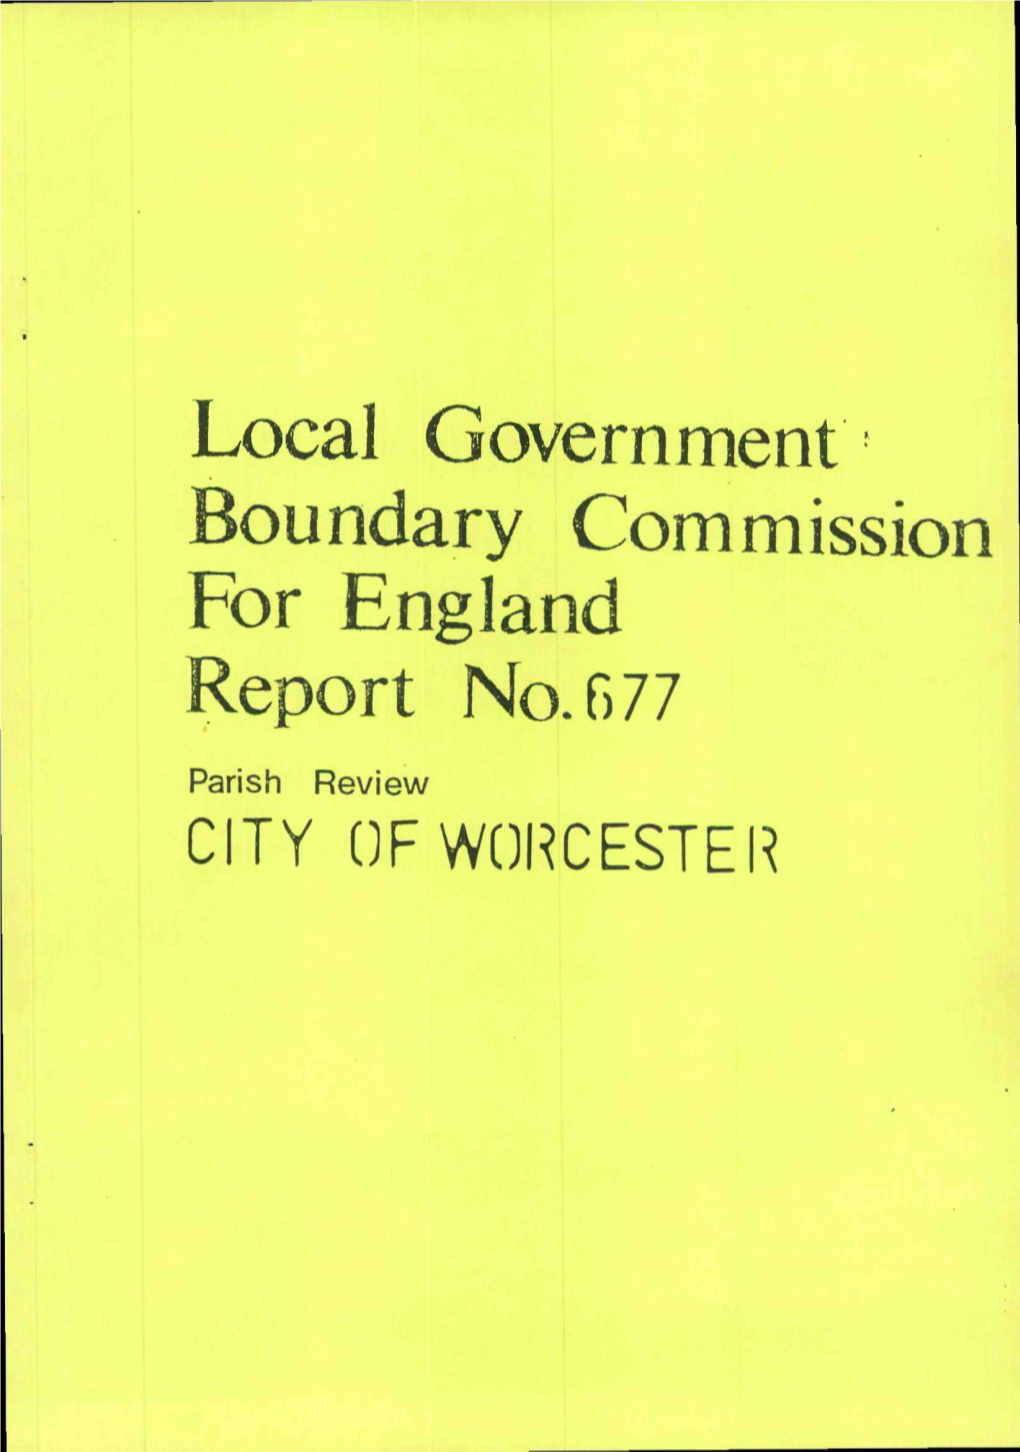 Local Government Oundary Commission for England No.G77 Parish Review CITY of WORCESTER LOCAL Covernuqtt